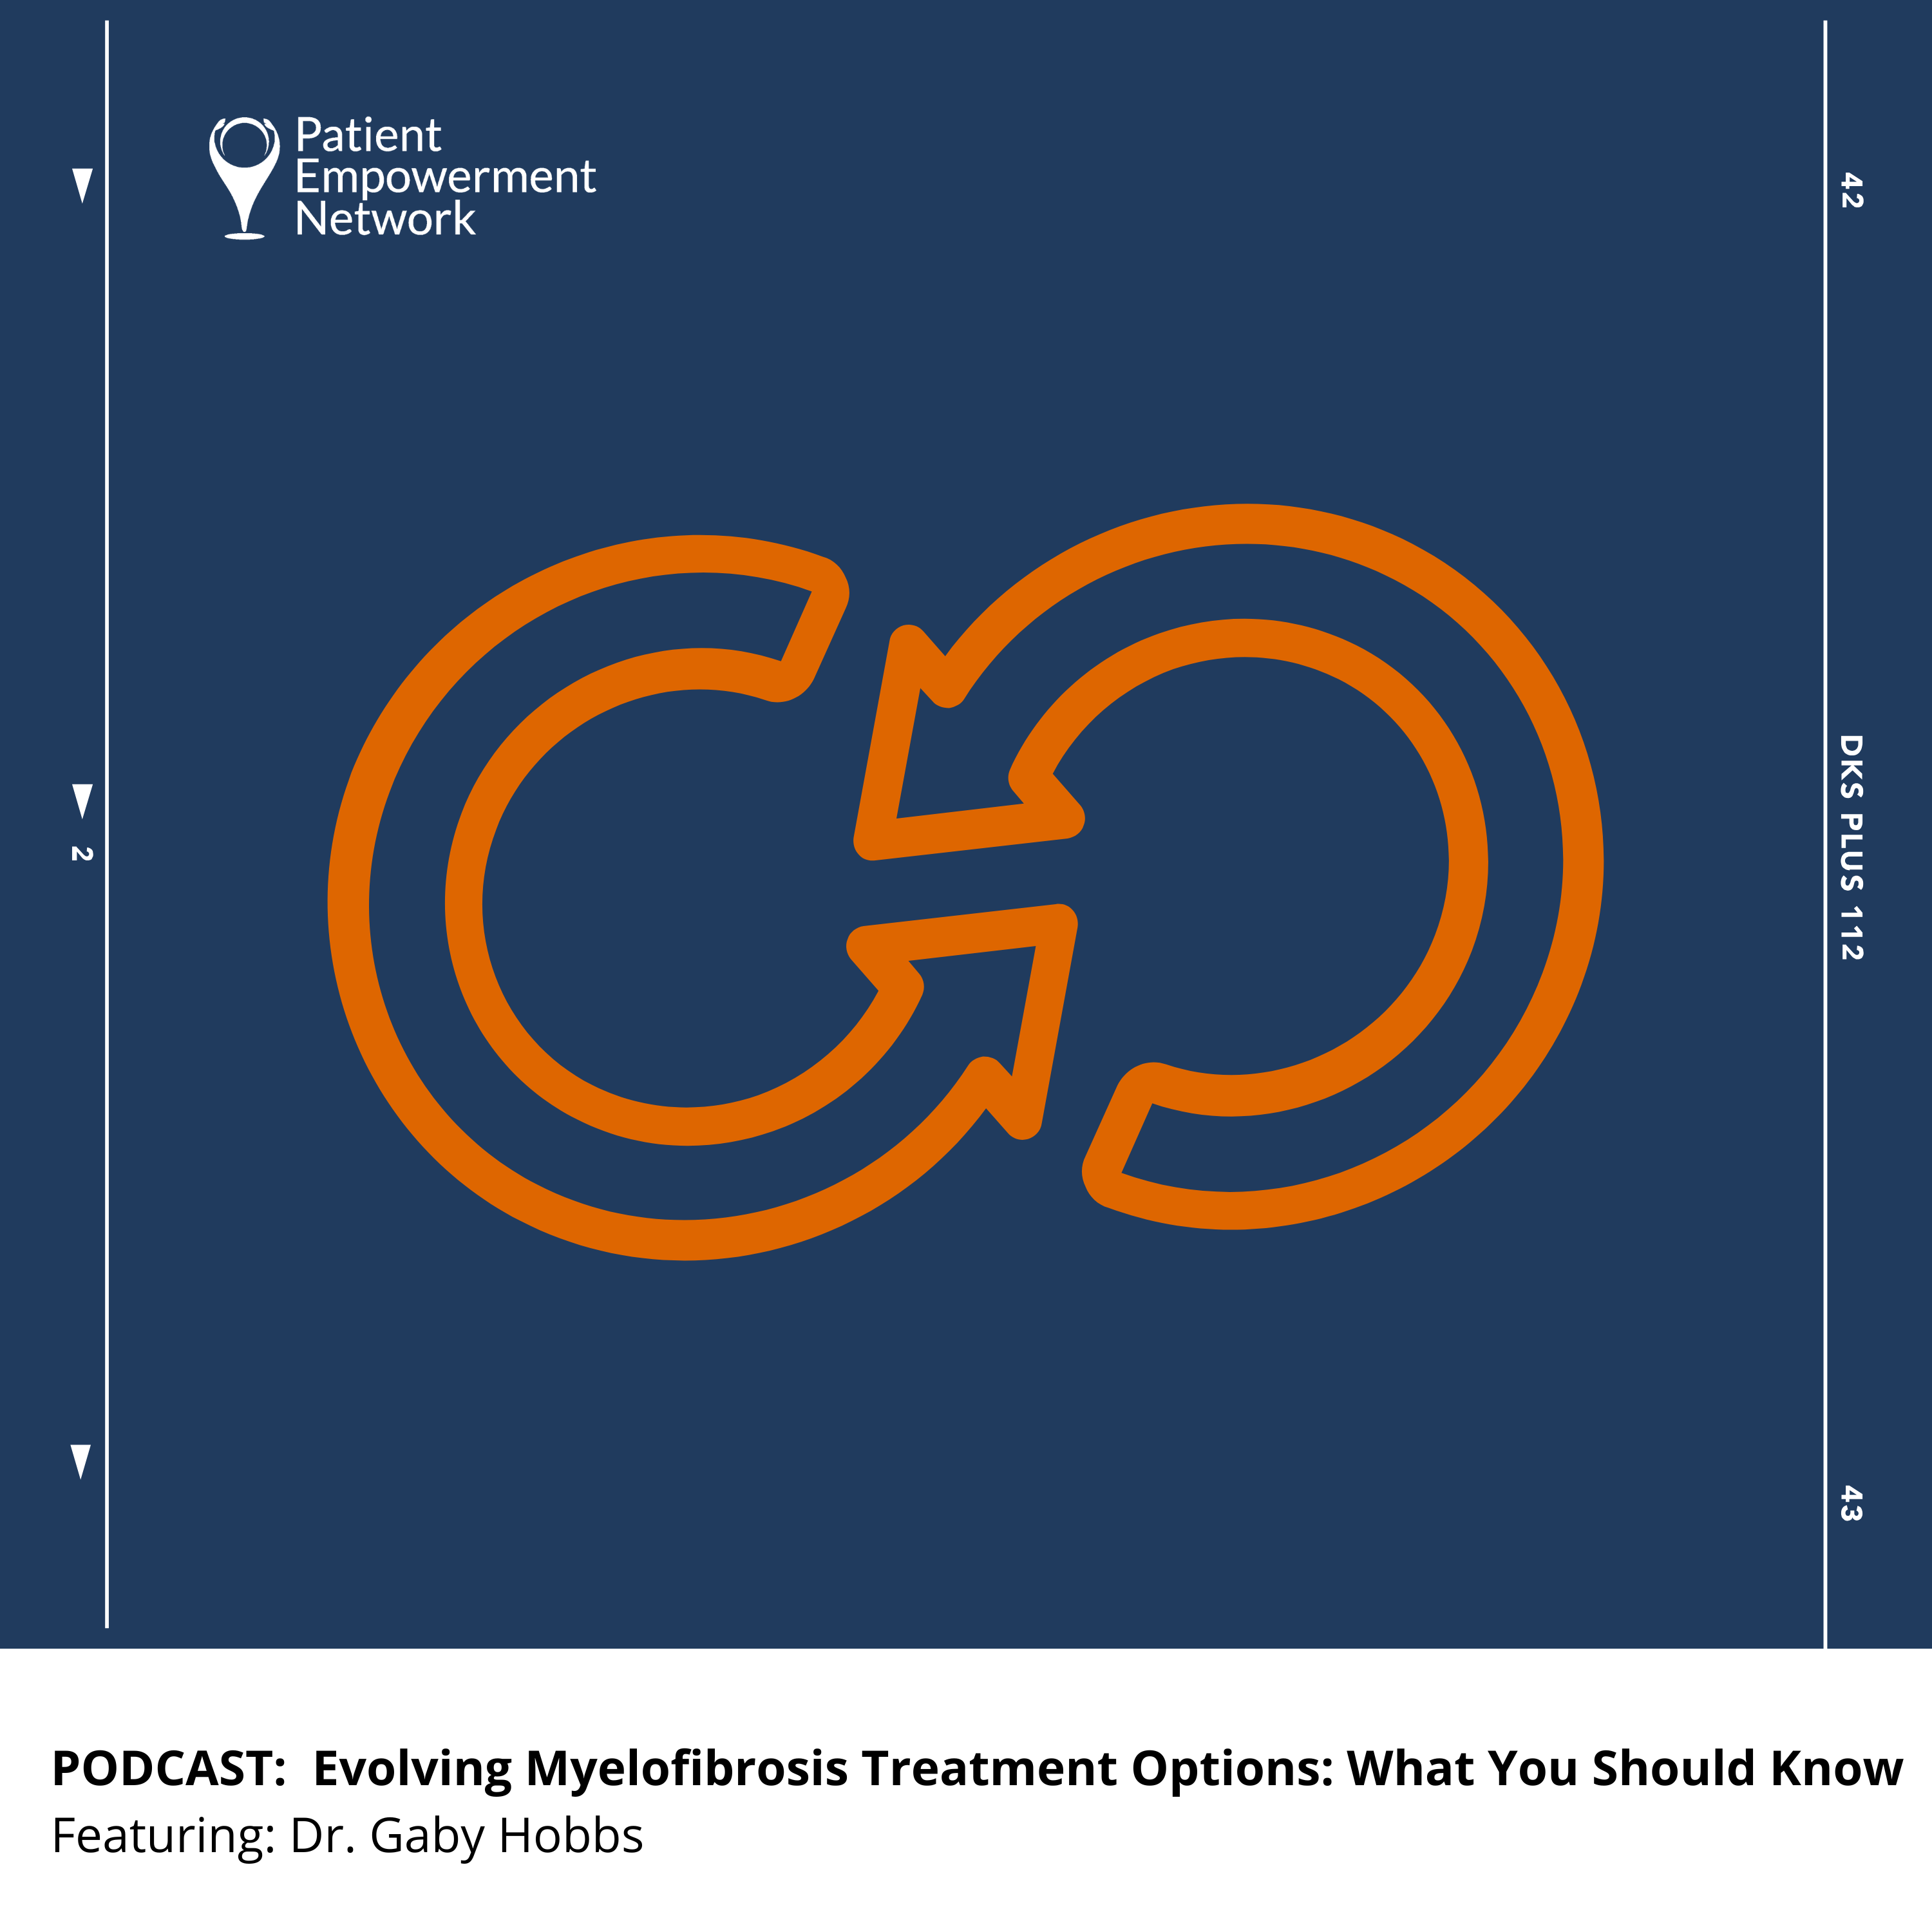 PODCAST: Evolving Myelofibrosis Treatment Options: What You Should Know